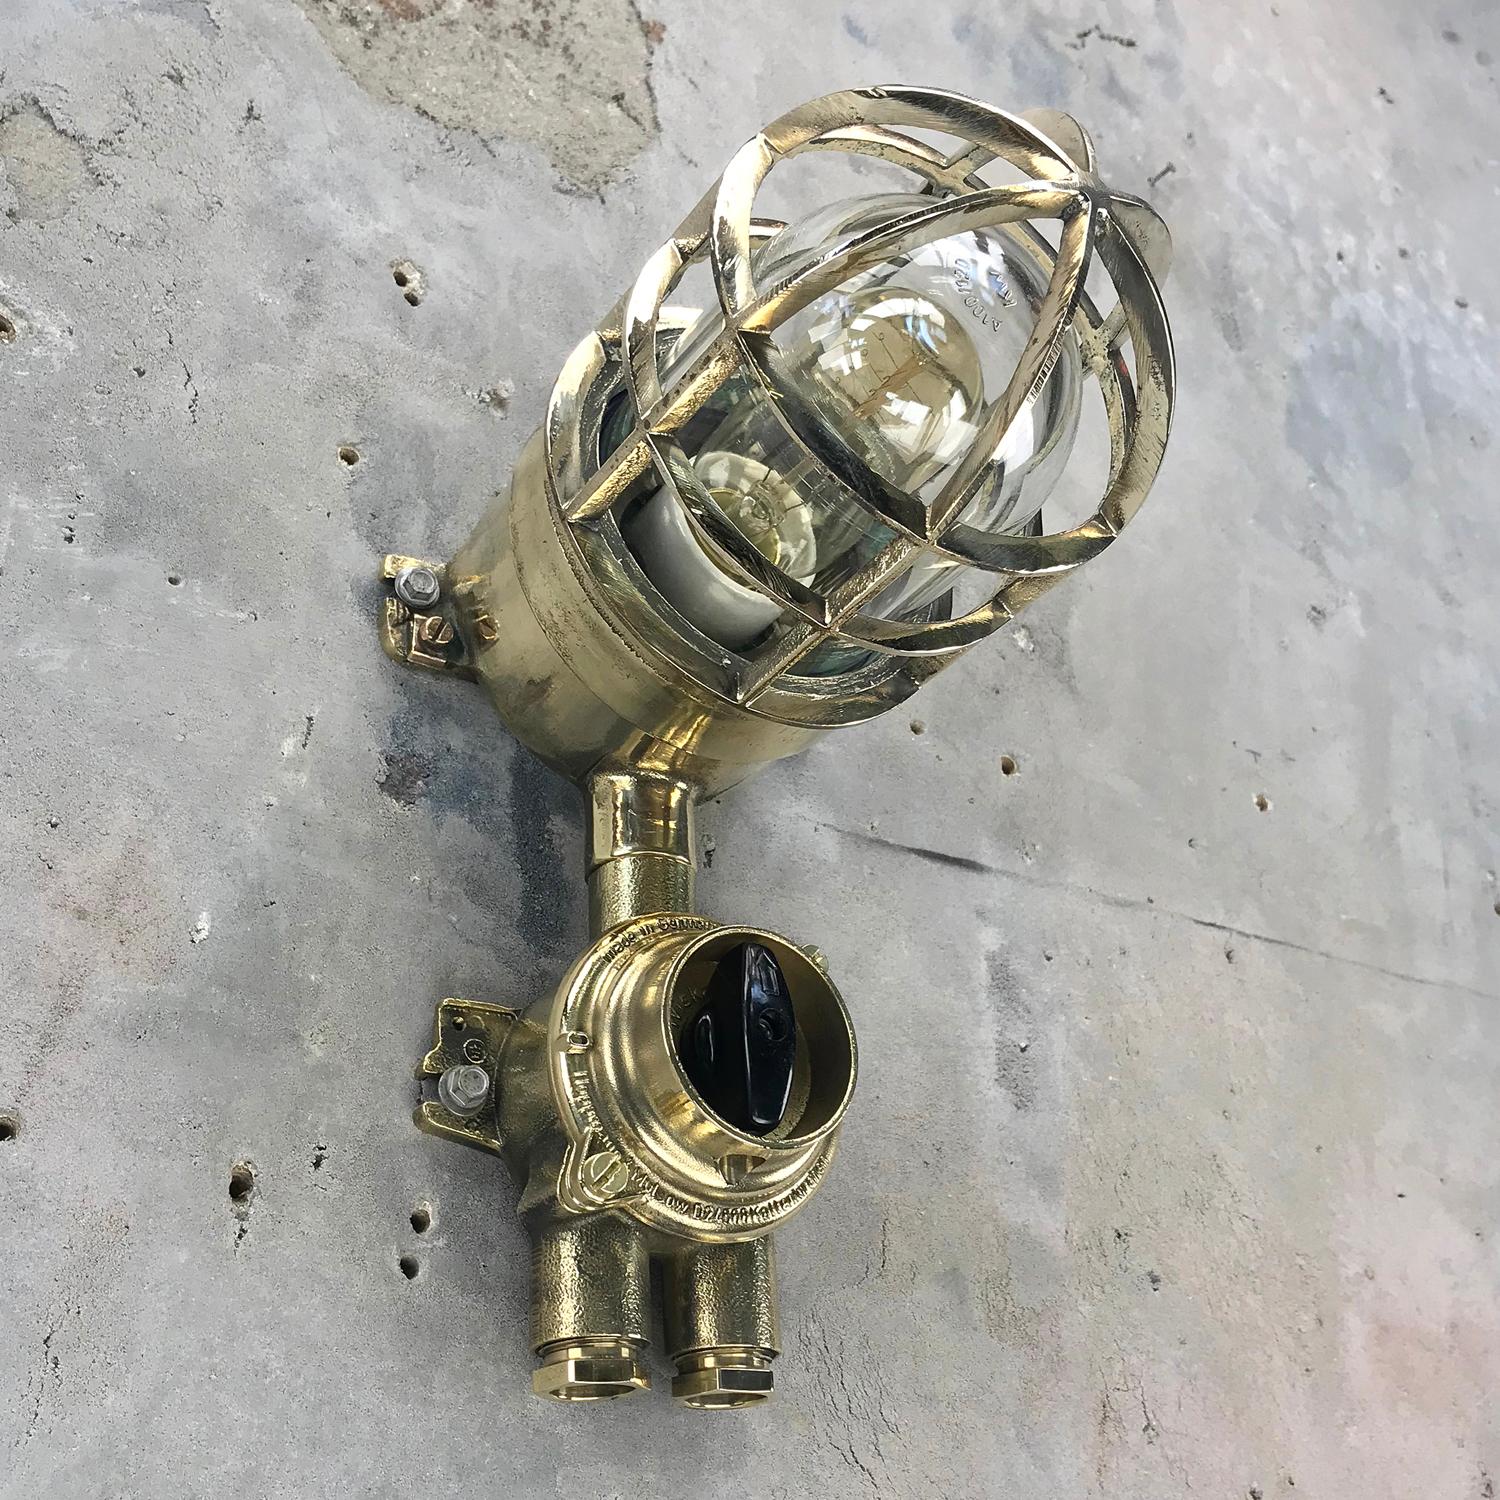 1970s German Explosion Proof Wall Light Cast Brass, Glass Shade & Rotary Switch For Sale 10